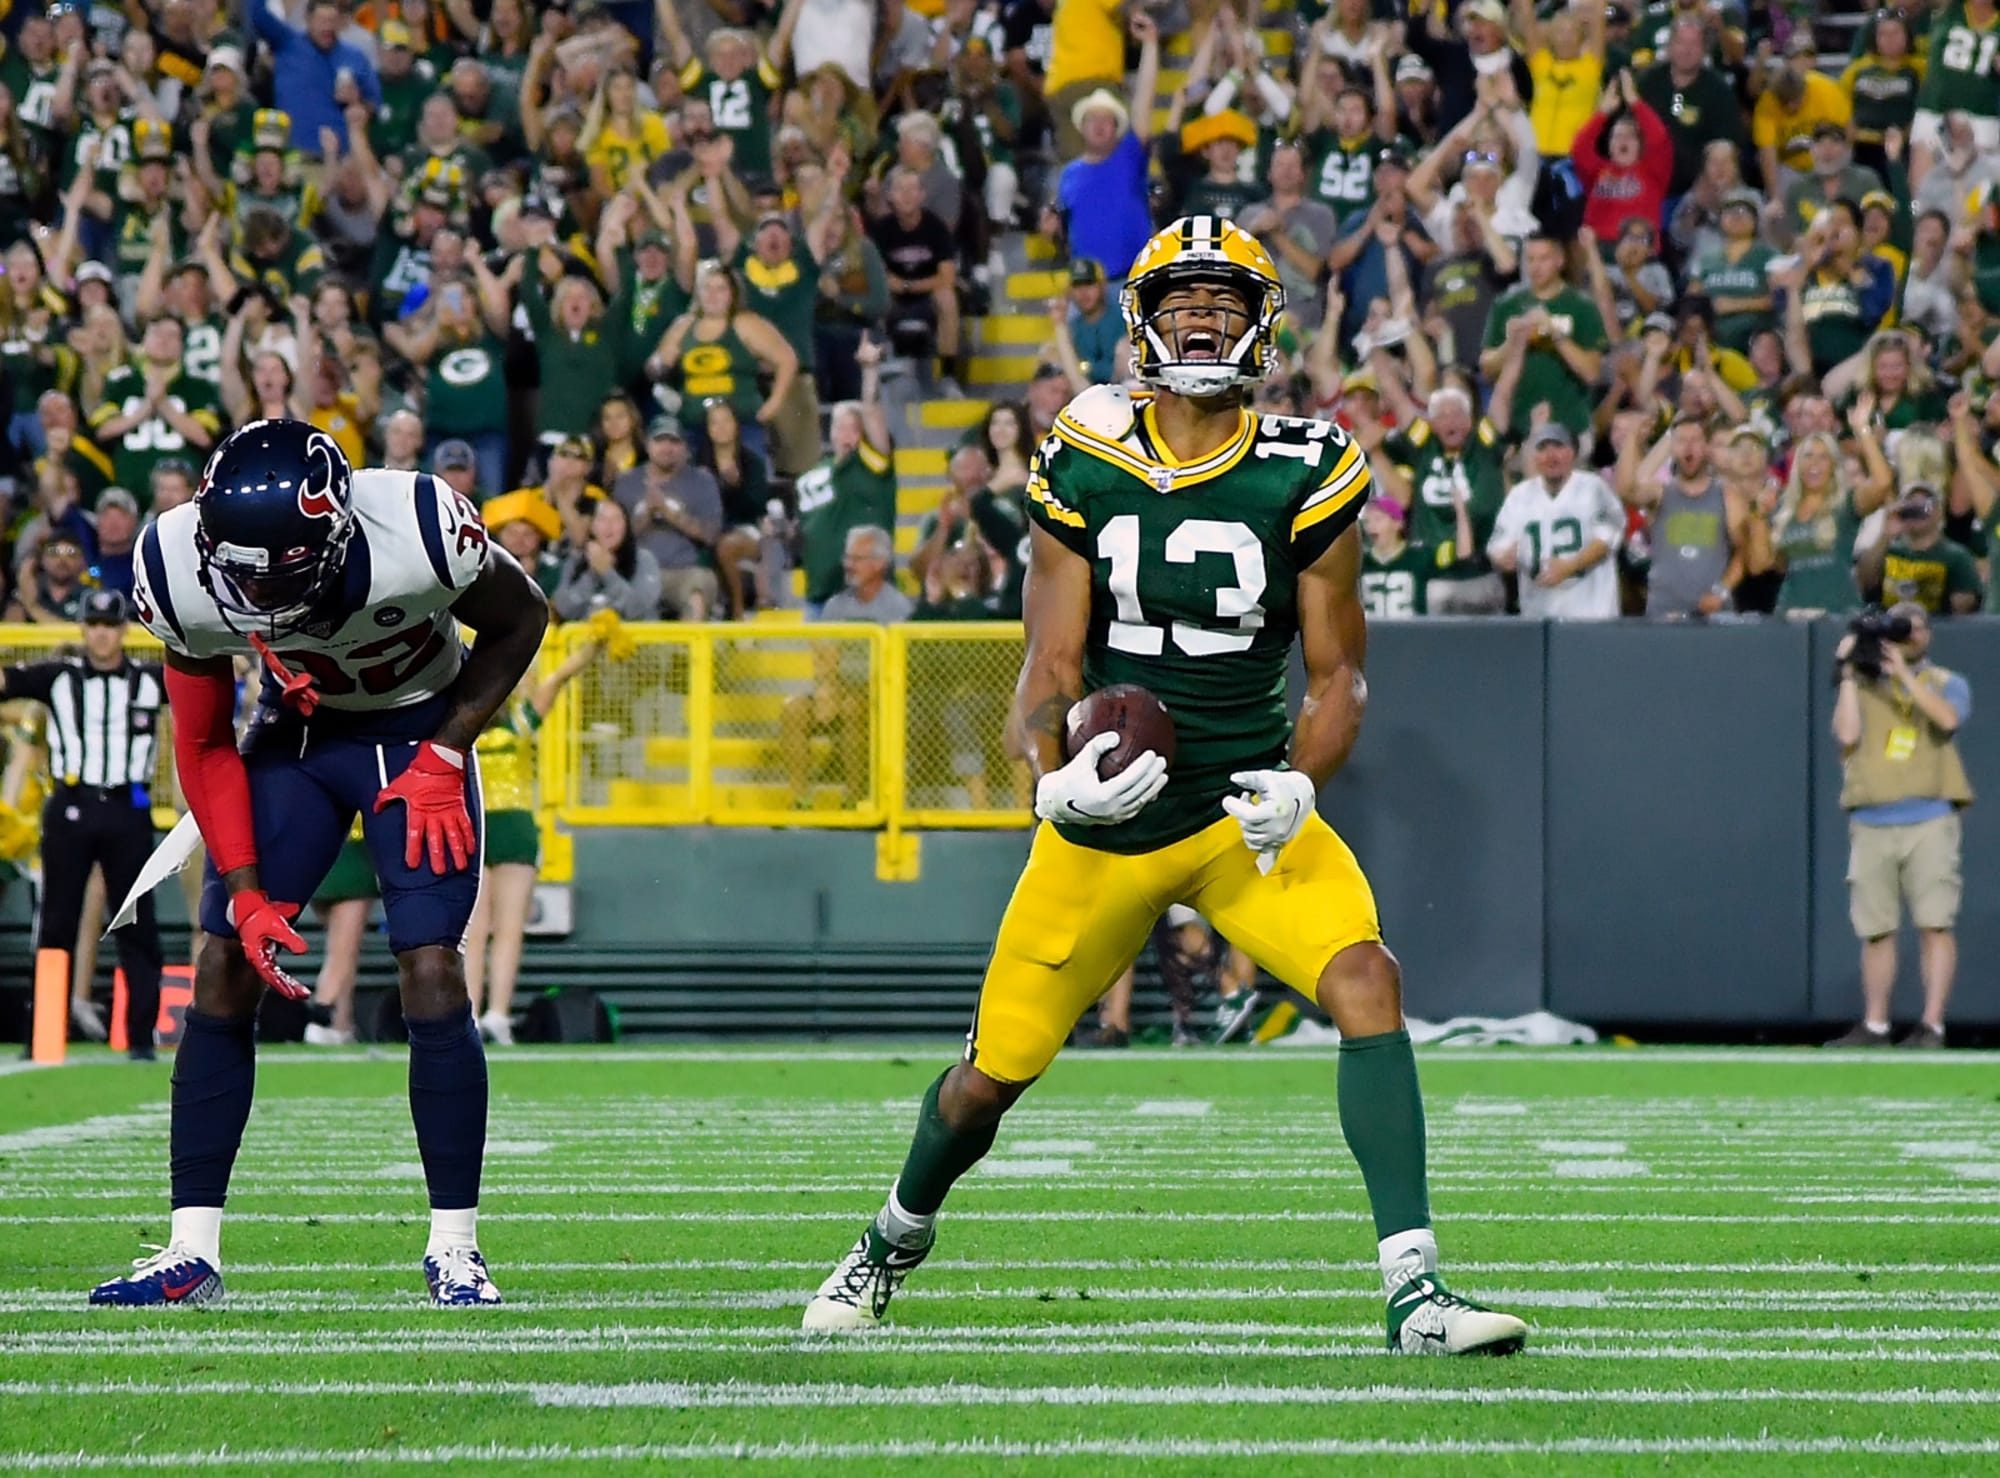 Allen Lazard has 14 career touchdowns for the Green Bay Packers